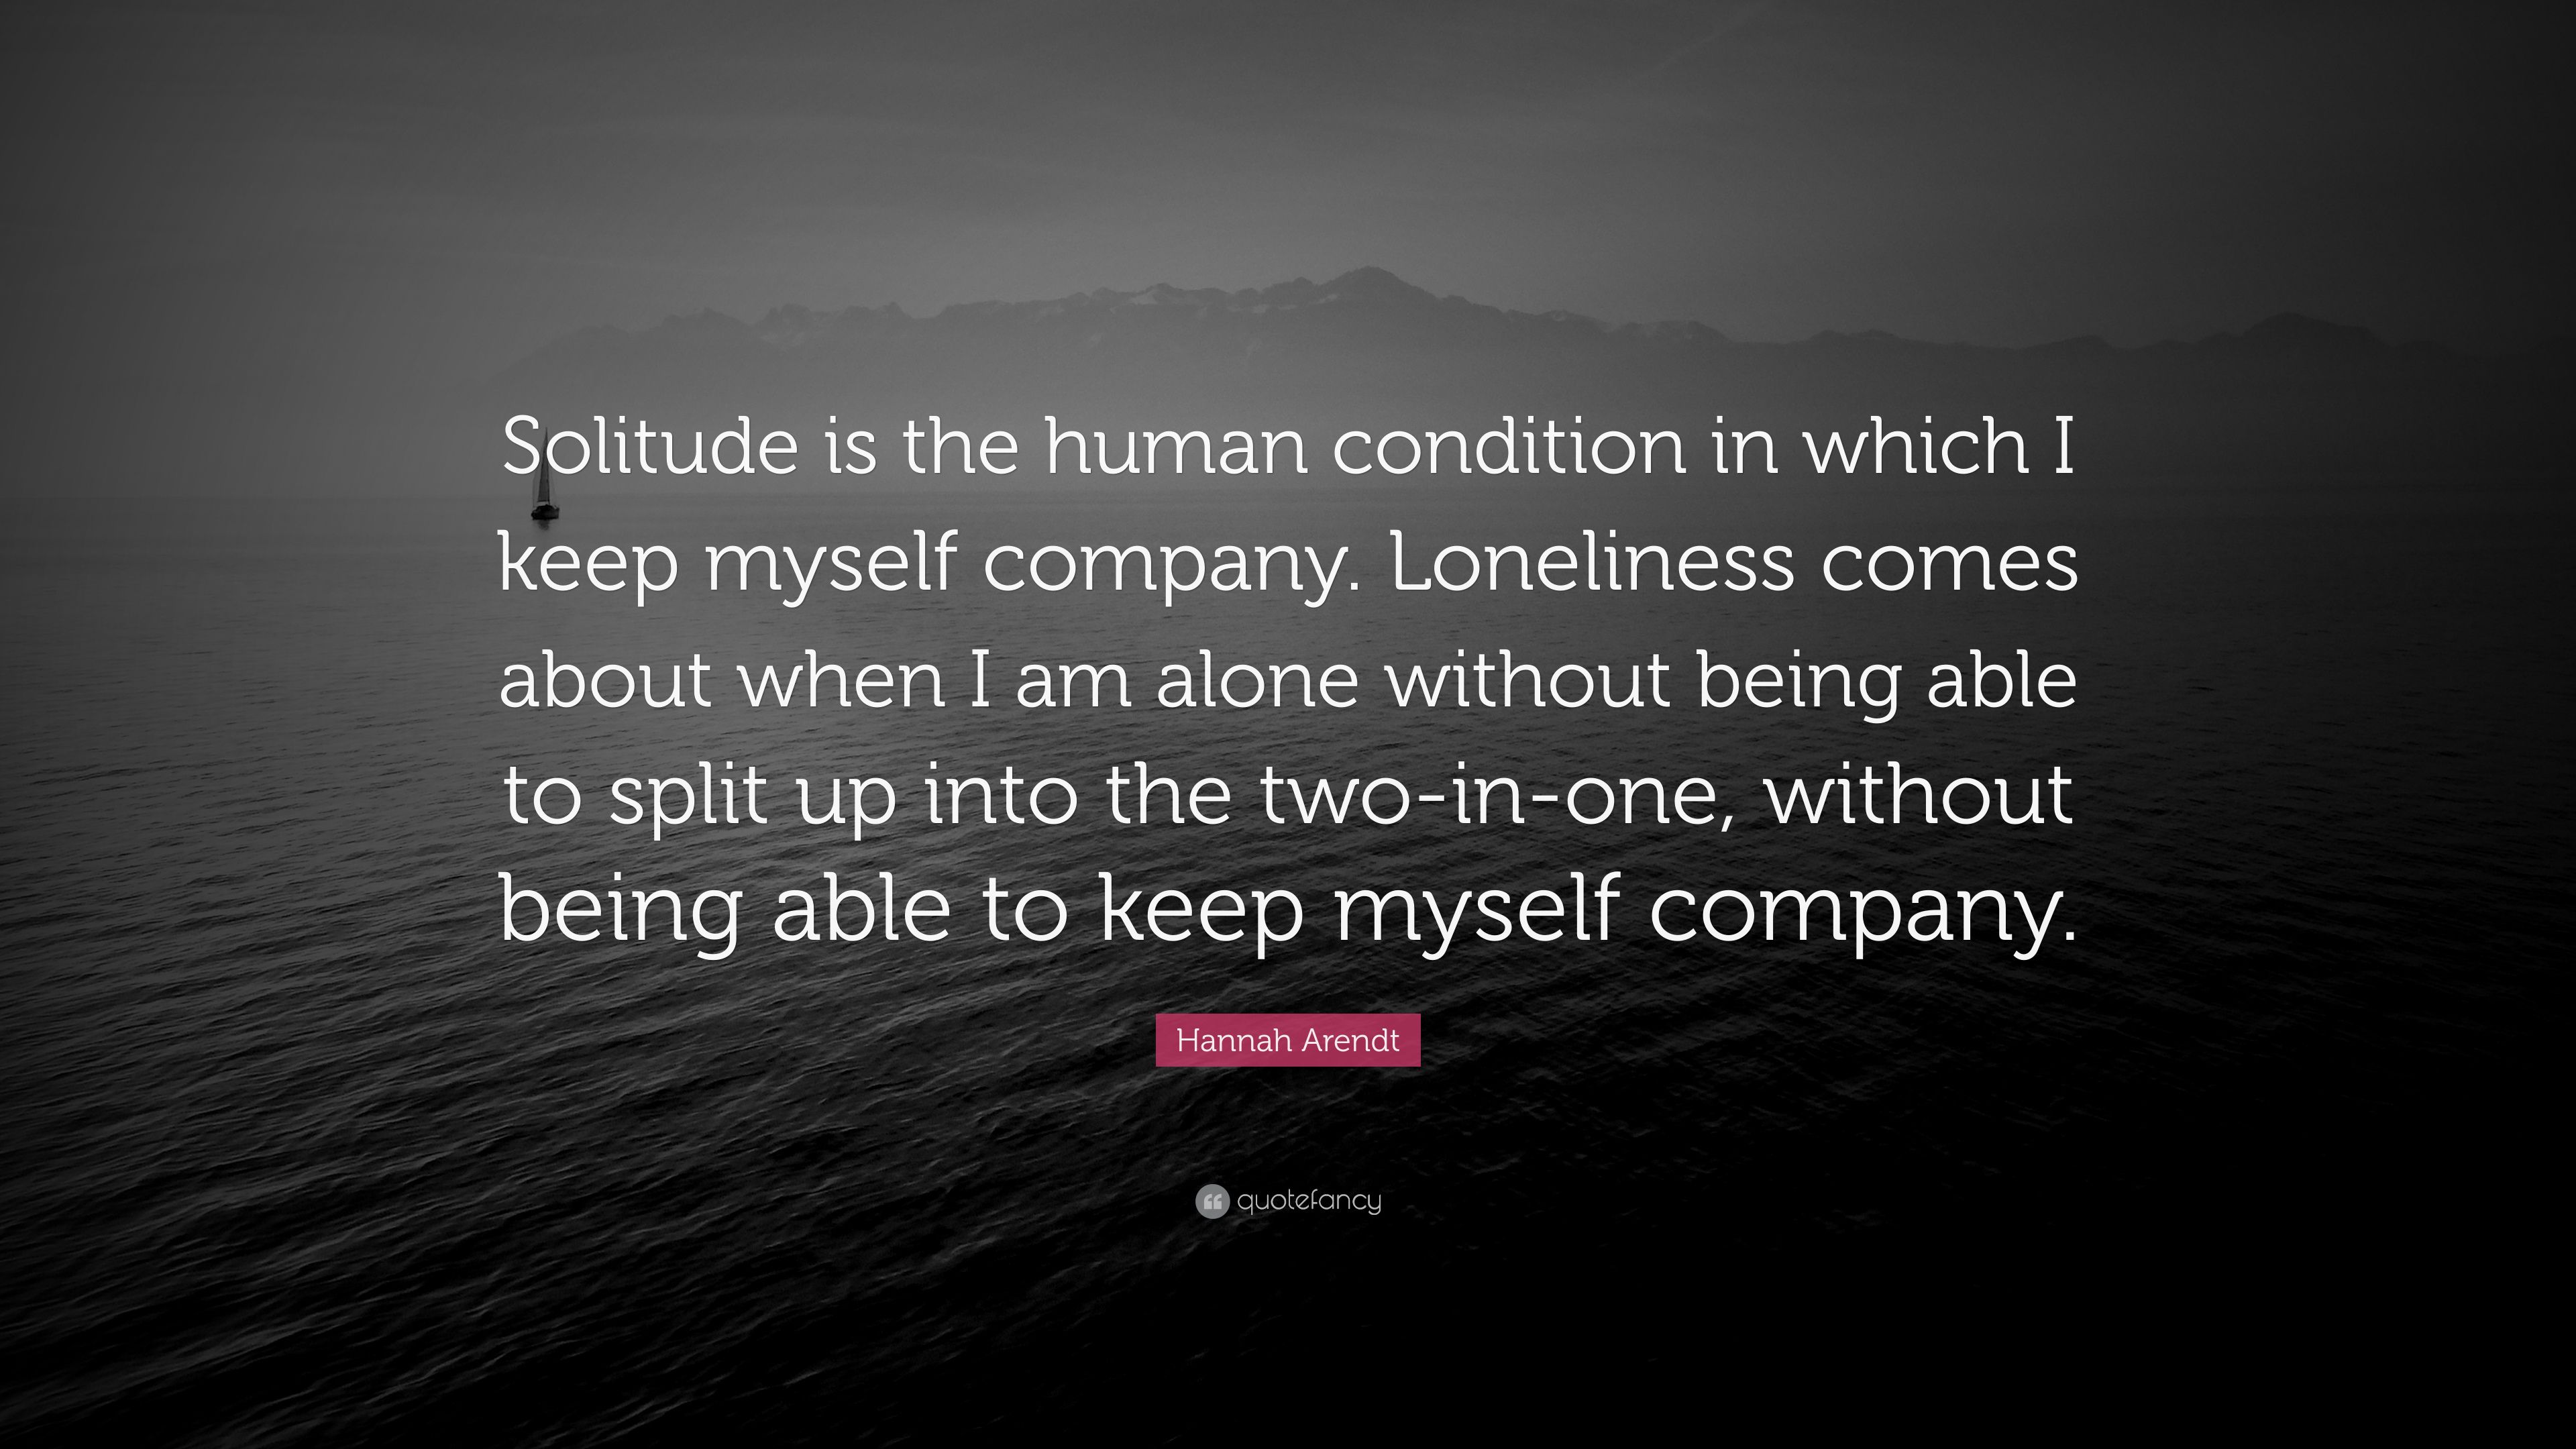 Hannah Arendt Quote: “Solitude is the human condition in which I